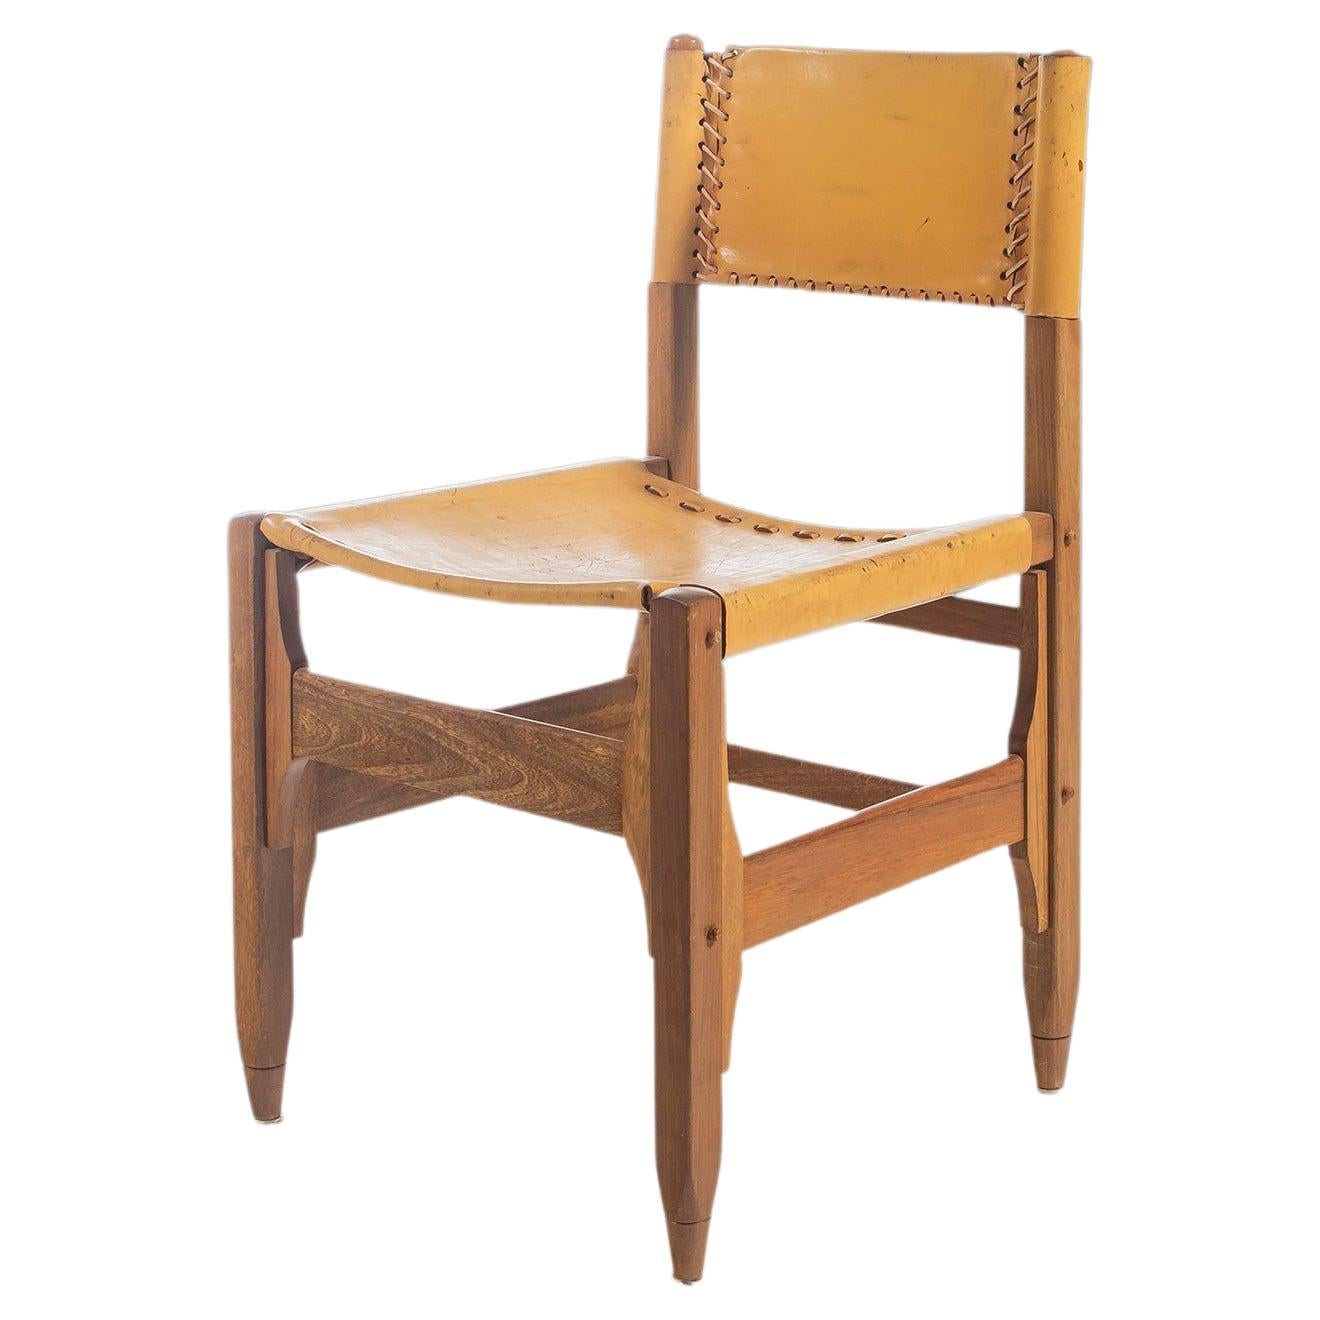 Tanned Saddle Leather Side Chair Designed by Biermann Werner for Arte Sano, 1960 For Sale